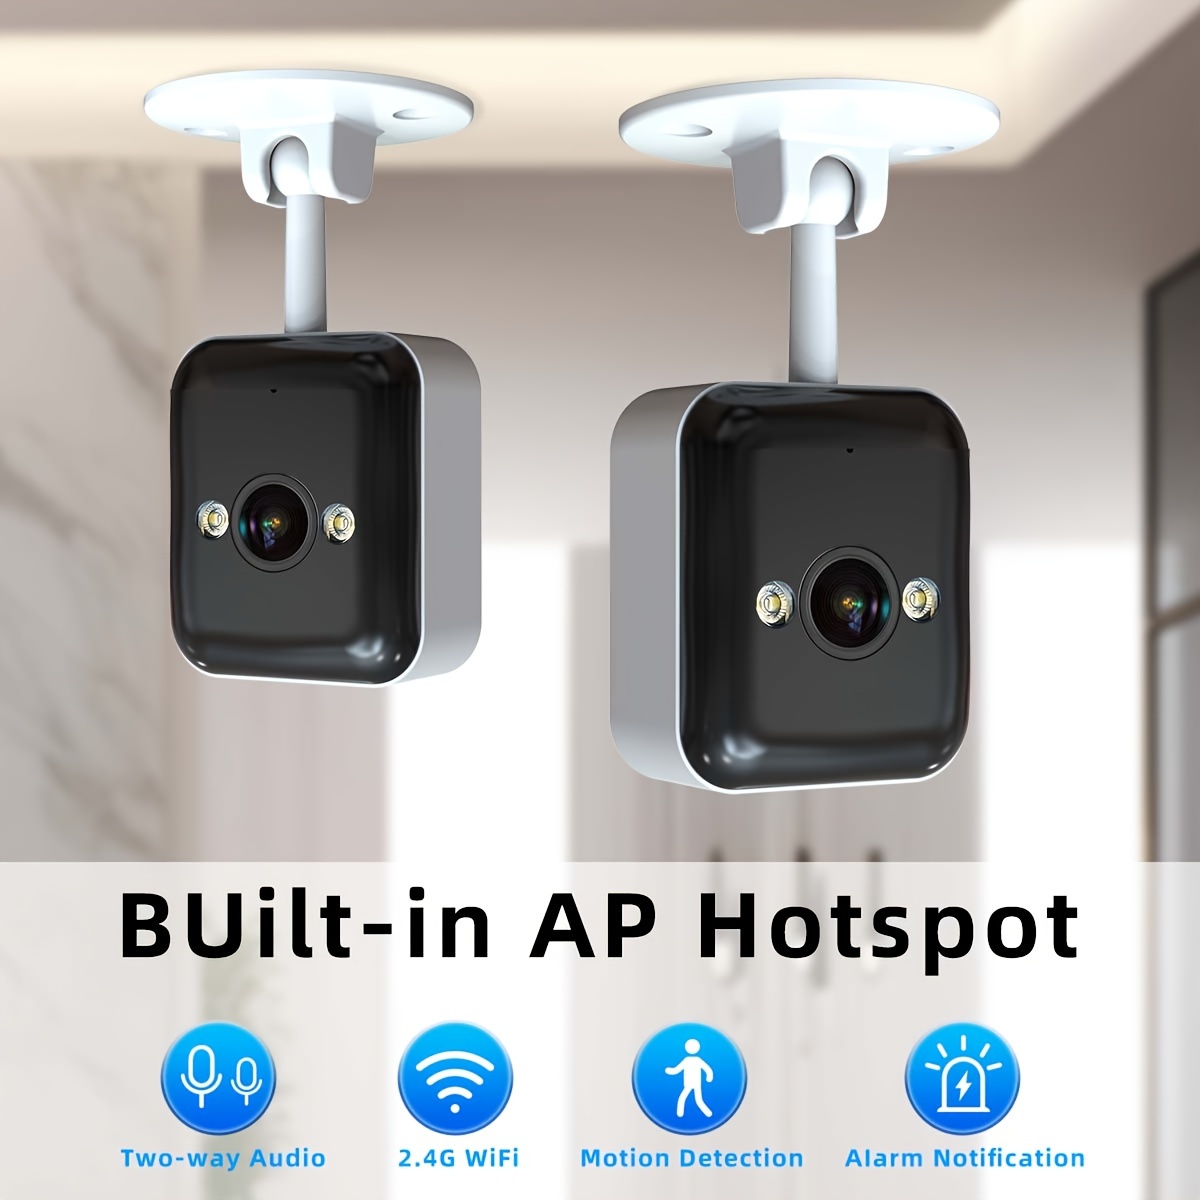 

2pcs 1080p Full Hd Wireless Surveillance Camera, Full-color Night Vision, Two-way Voice Call, Motion Detection, Built-in Ap Hotspot, Can Be Viewed Without Internet